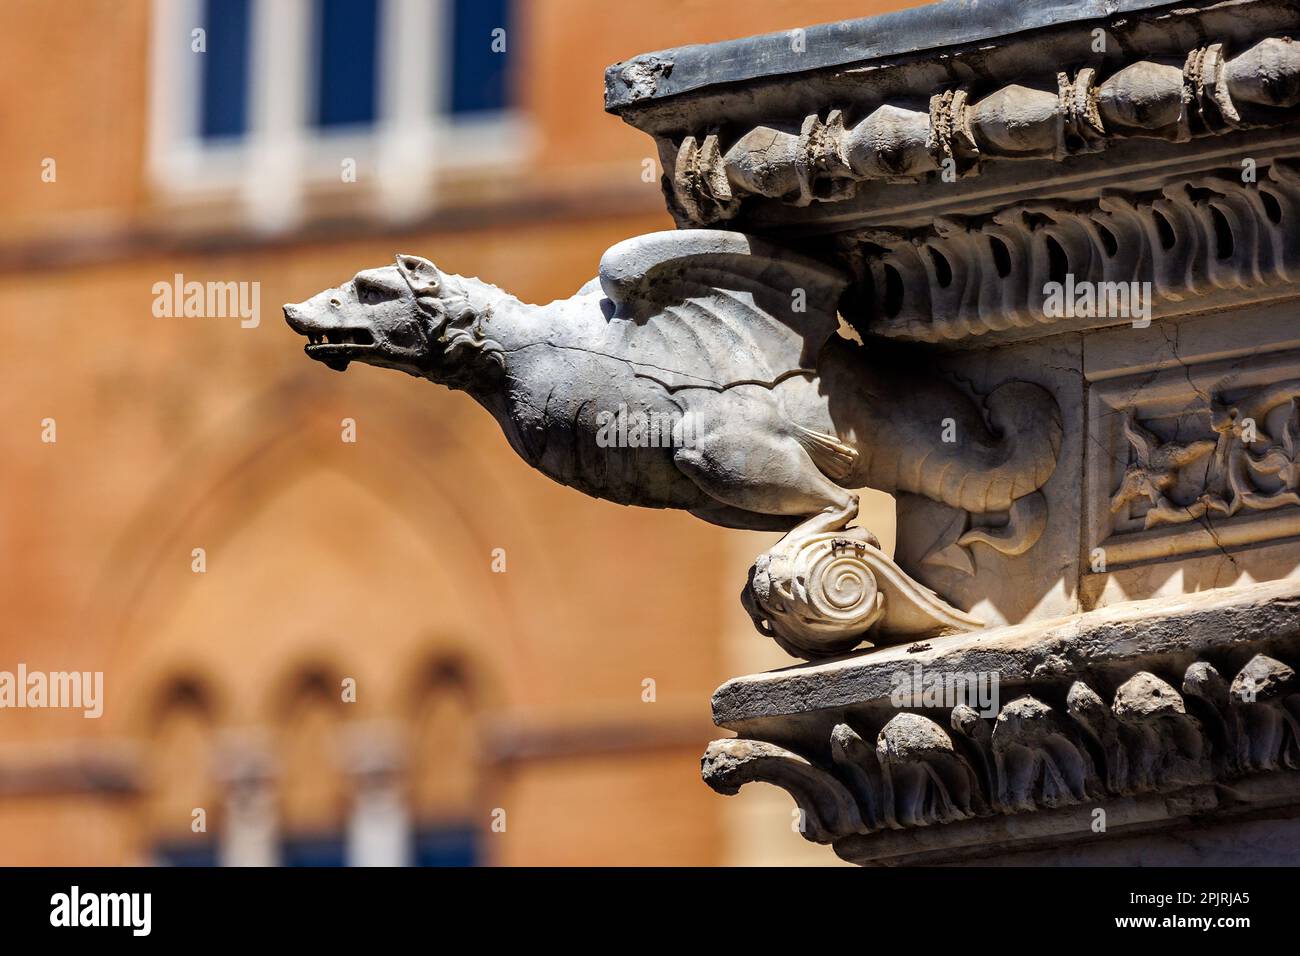 Details from Siena Stock Photo